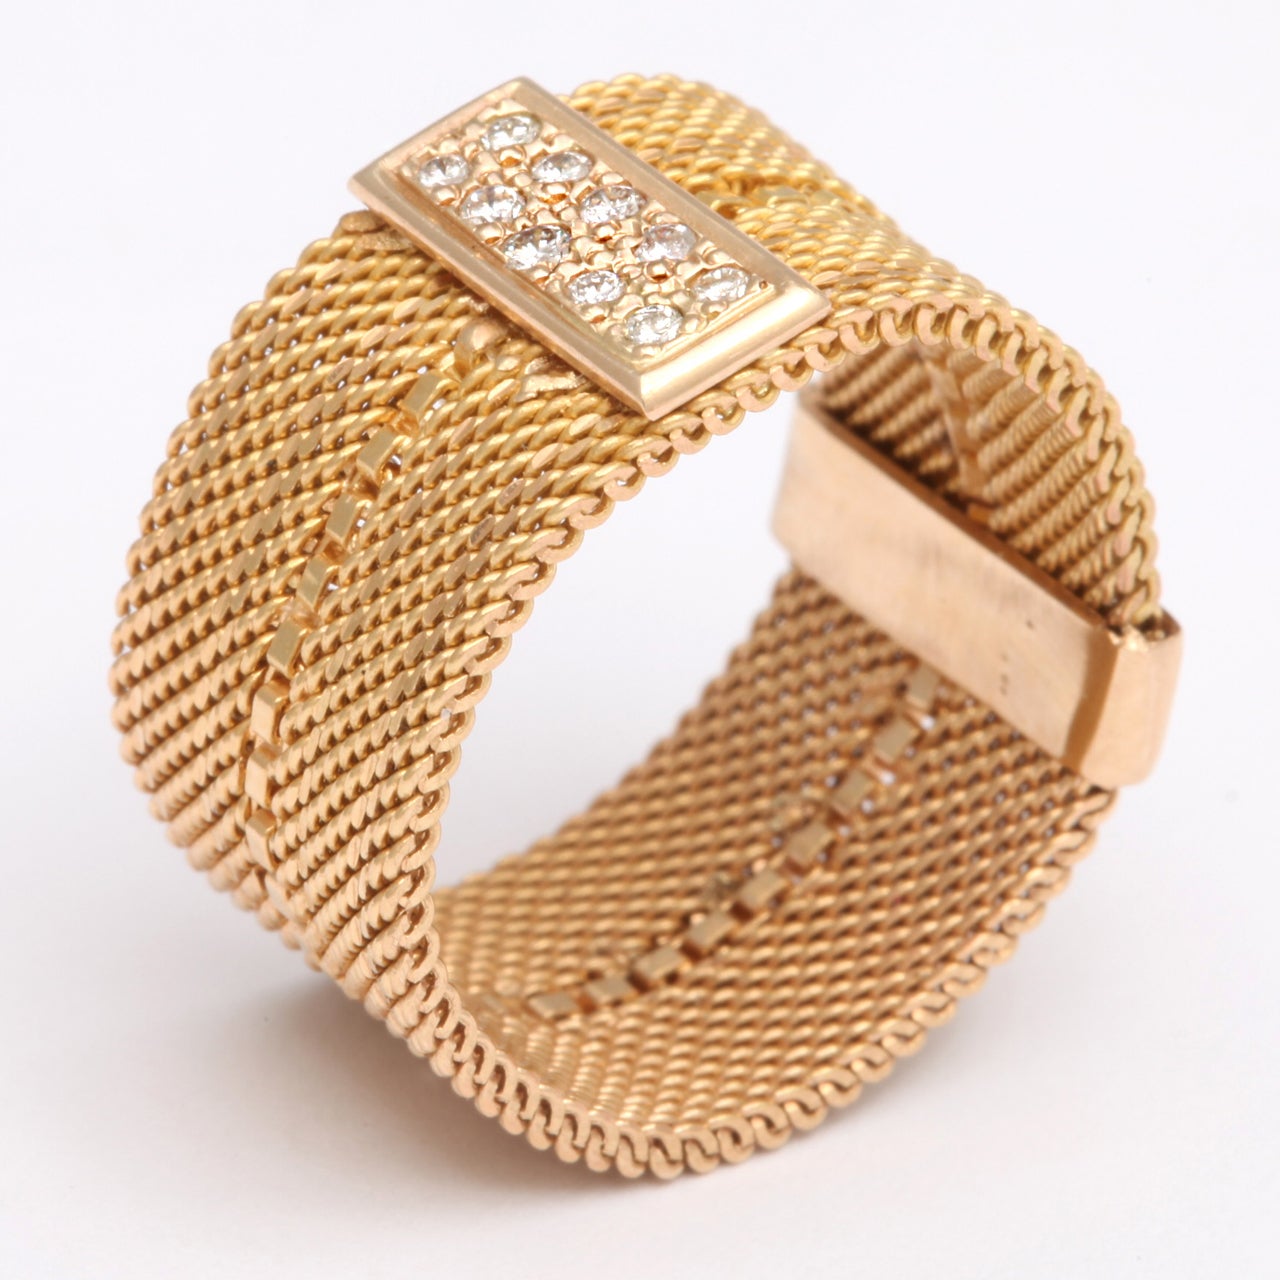 A great 18 kt flexible wide woven band with plaque of ten small diamonds. Size 6